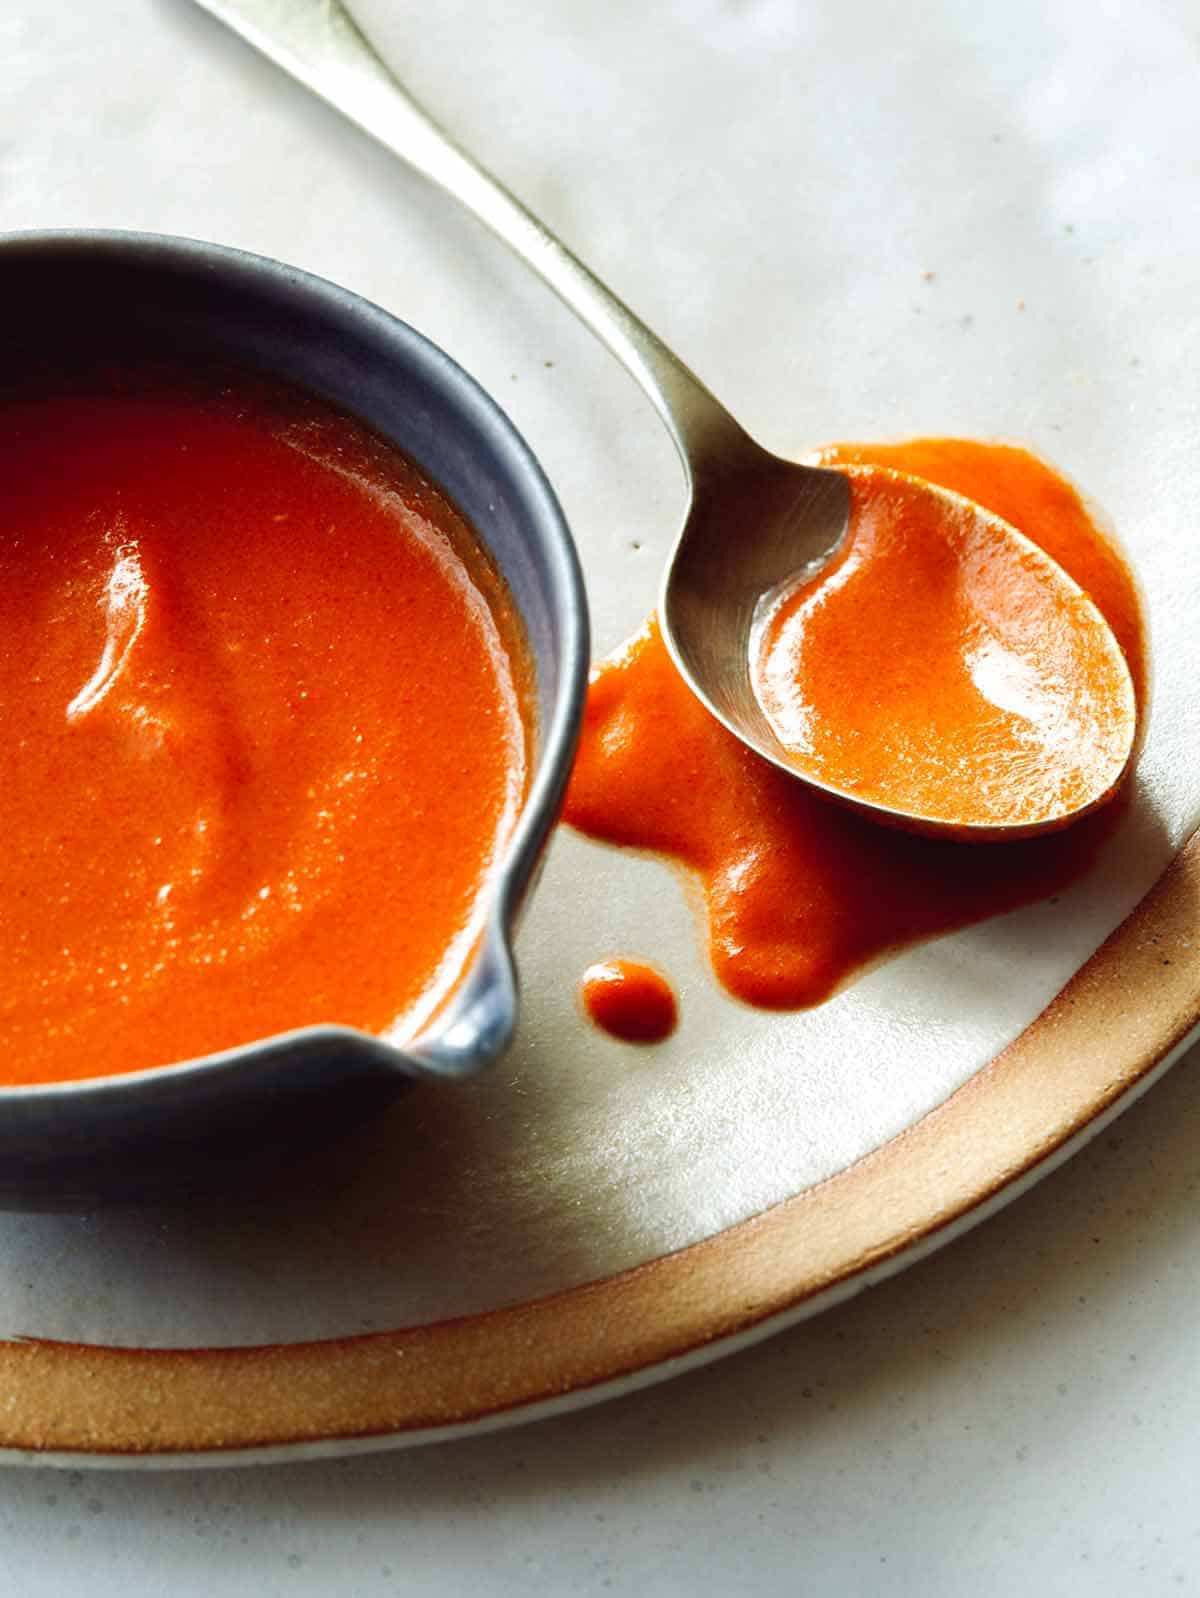 Buffalo sauce recipe in a bowl with a spoon next to it.